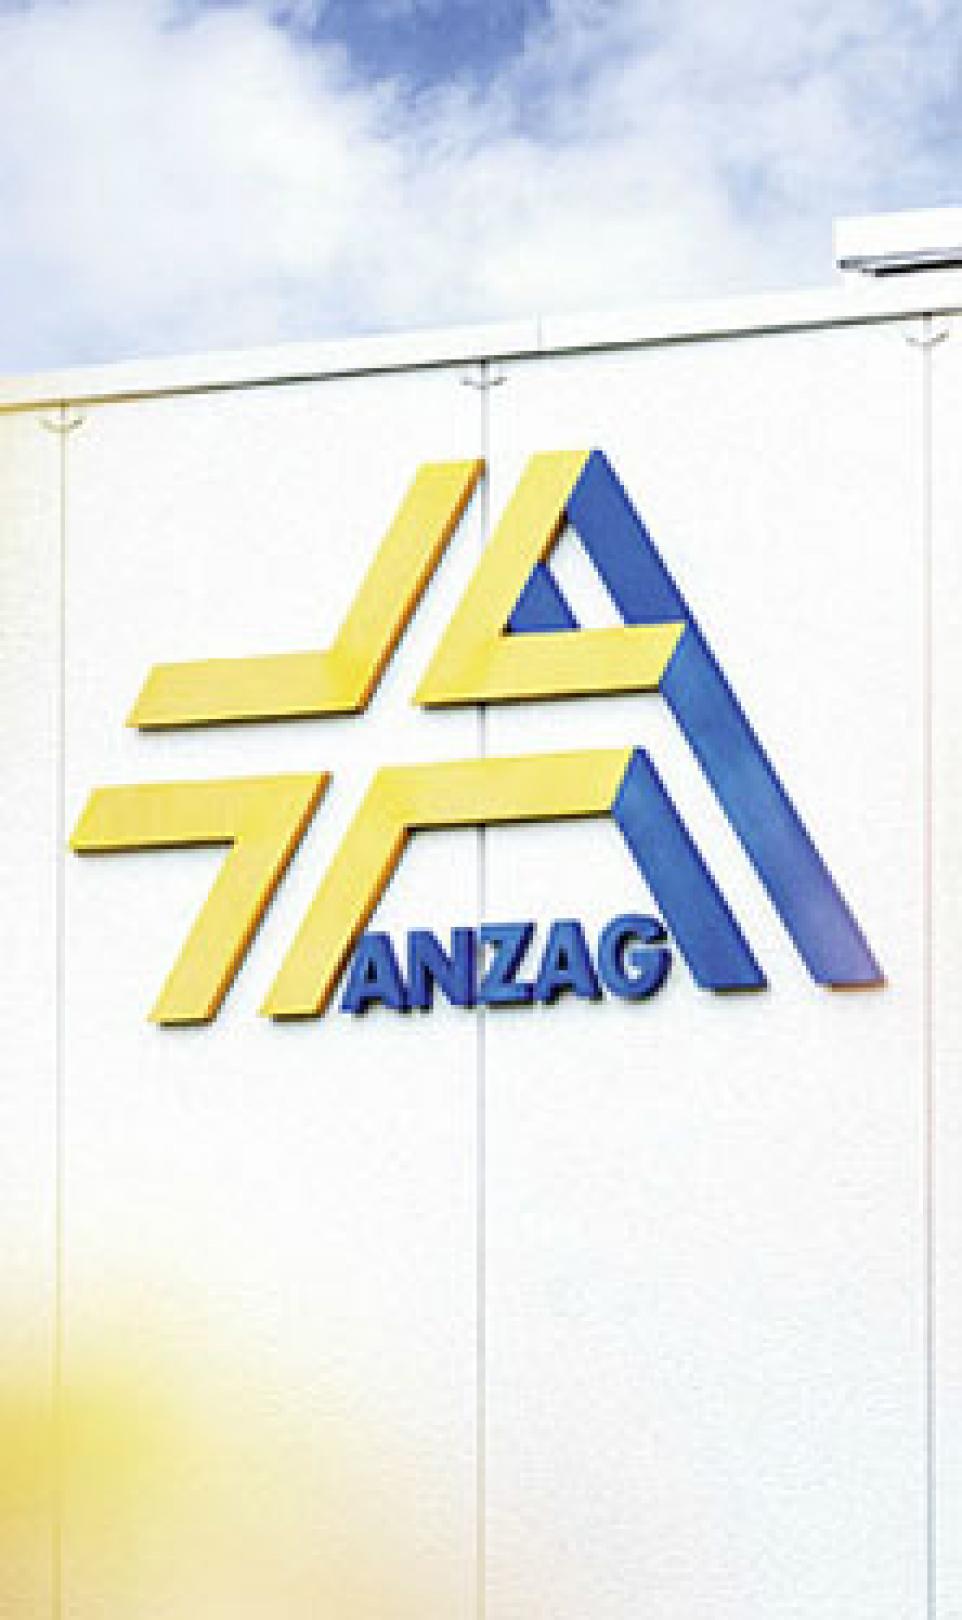 Close-up photograph of the Anzag logo on the headquarters building in Germany